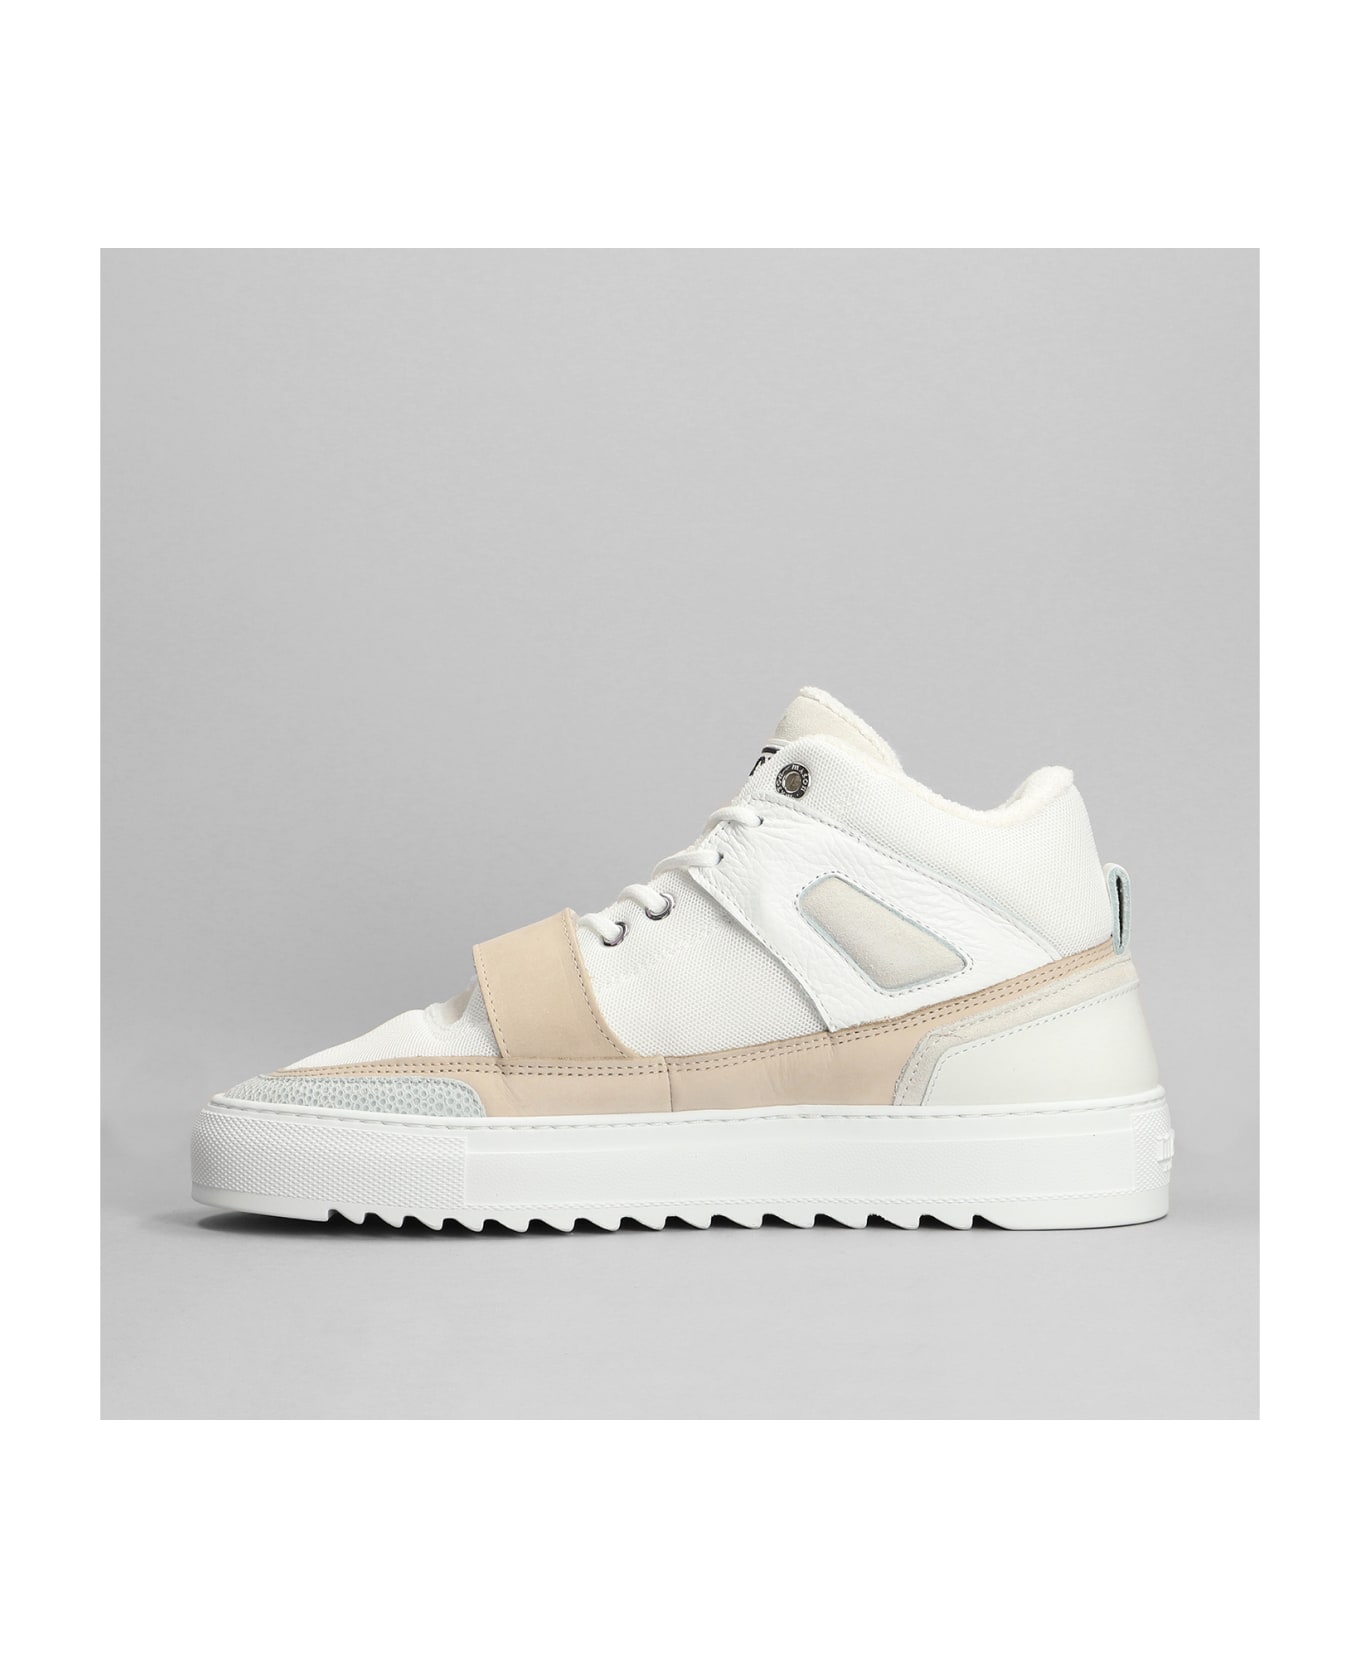 Mason Garments Firenze Mid Sneakers In White Leather And Fabric - White